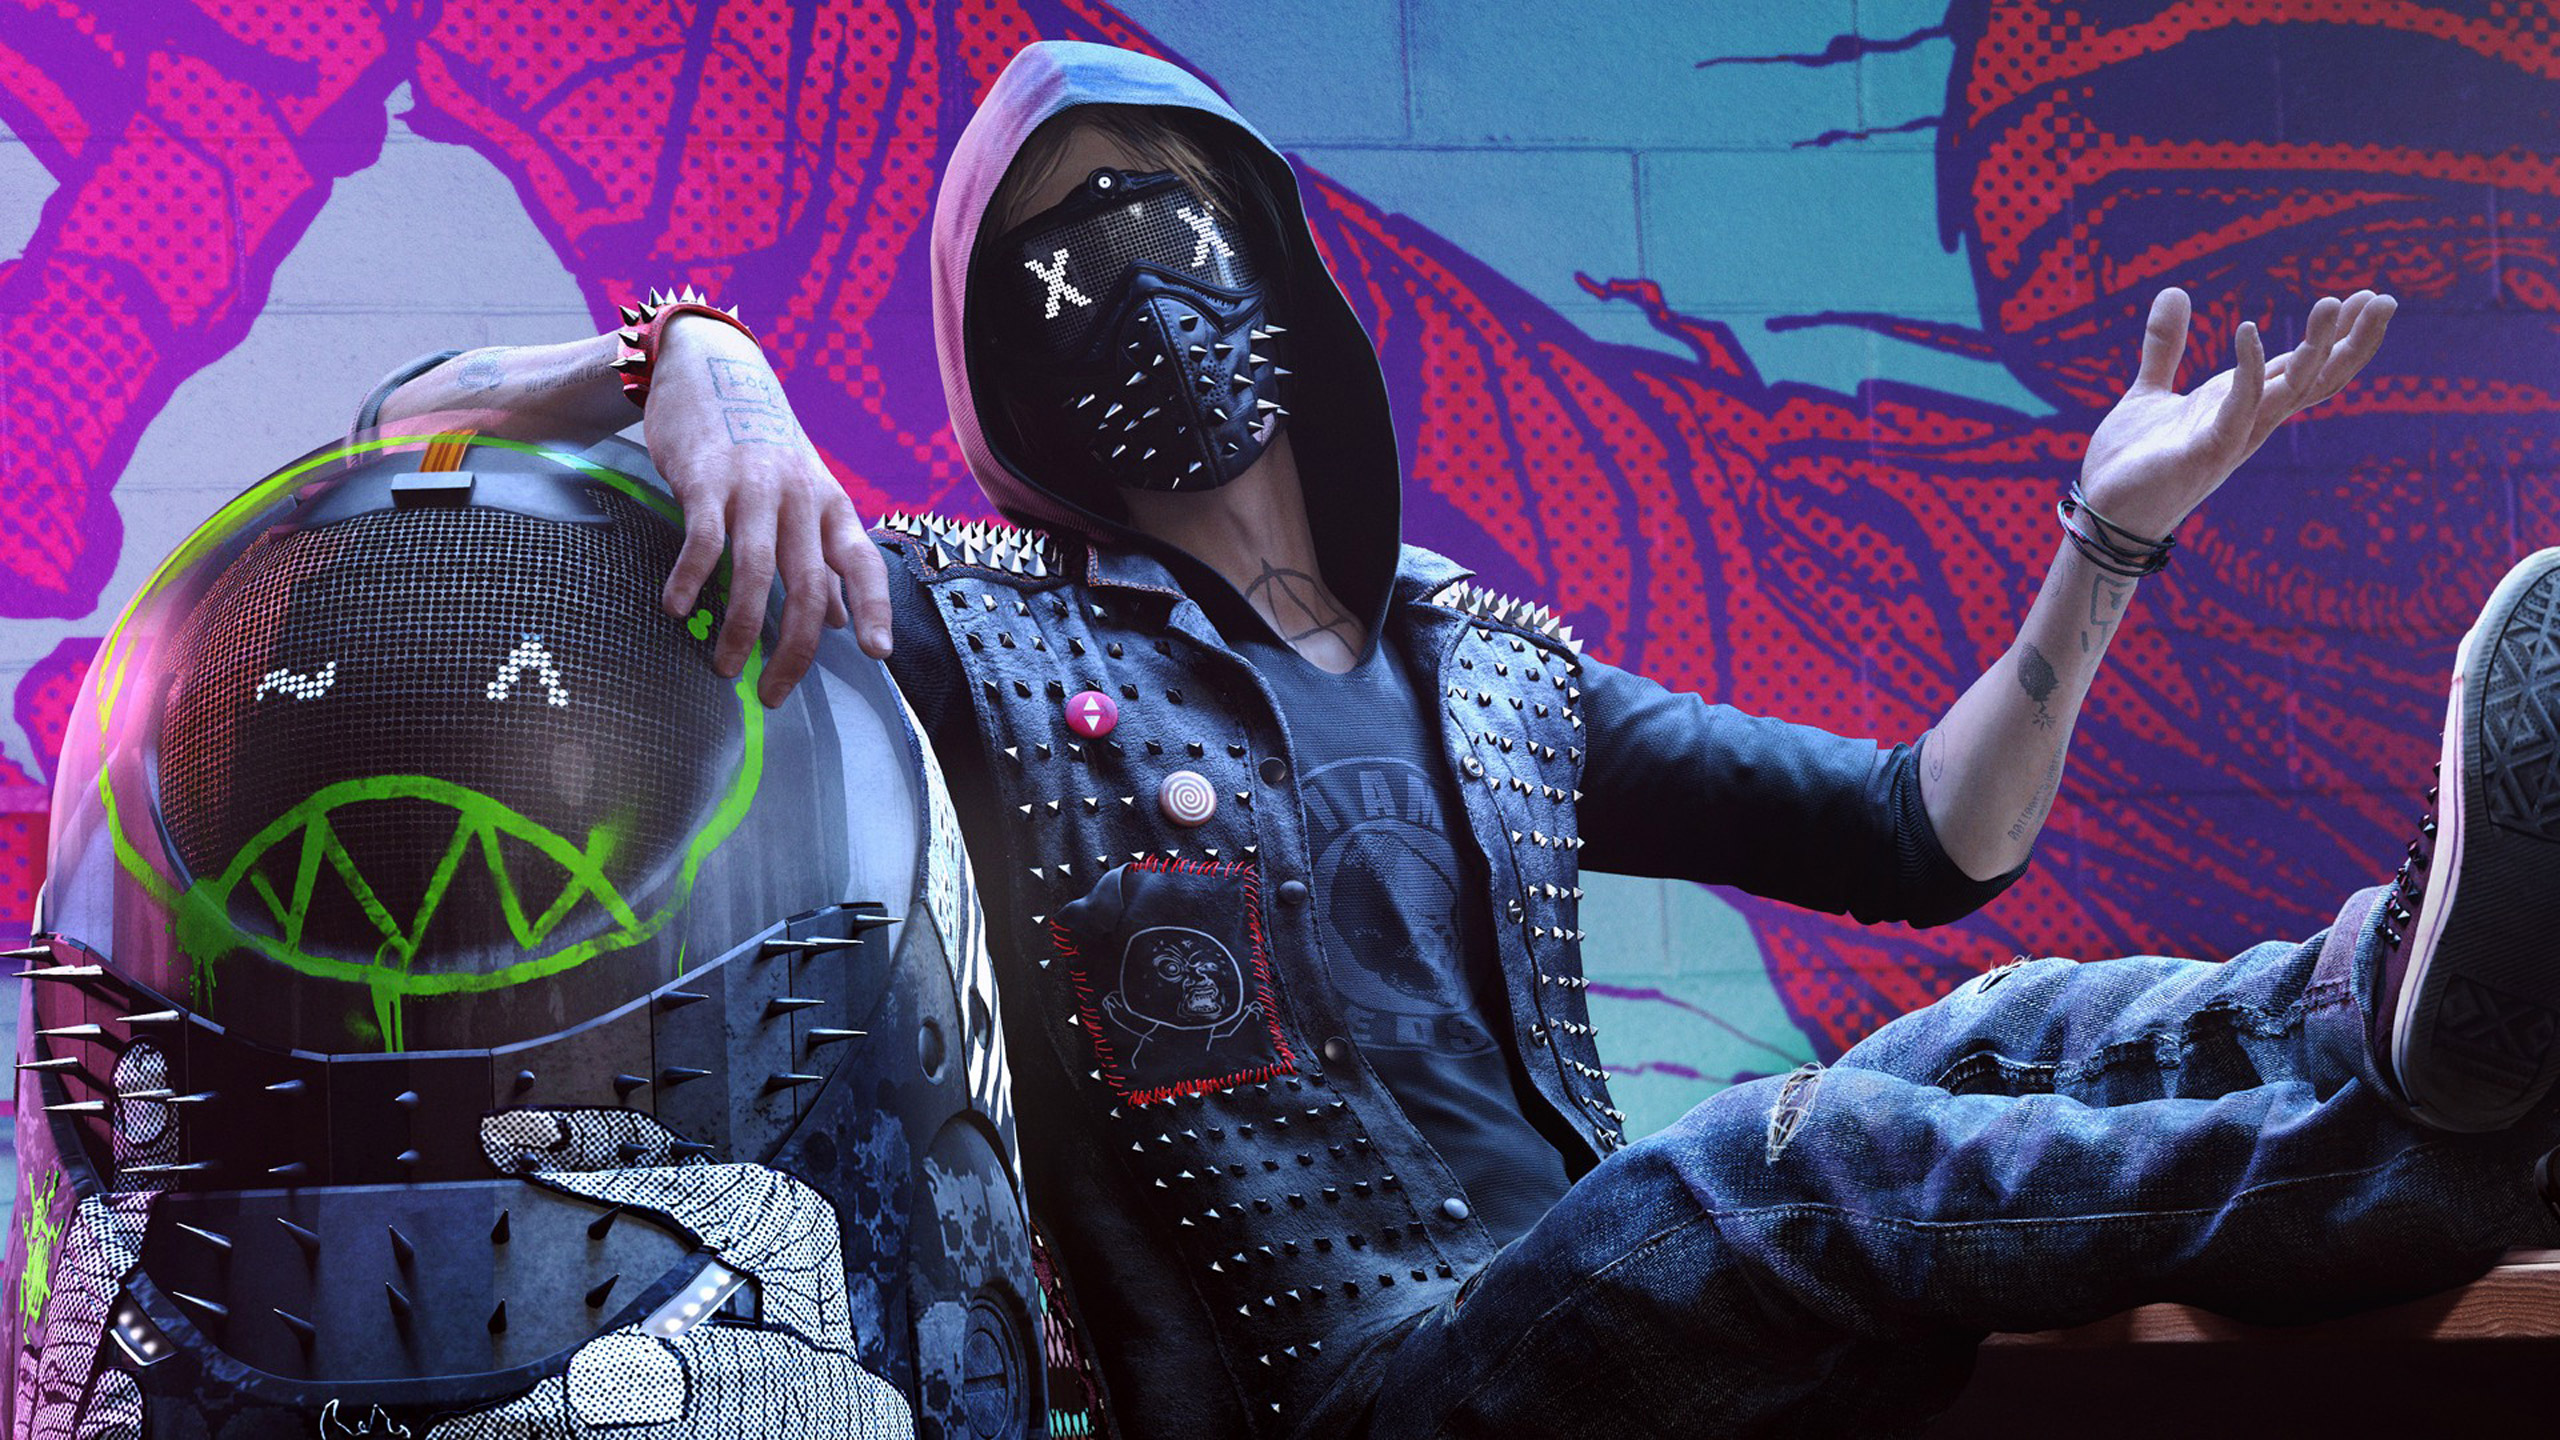 Wrench Watch Dogs 2 Wallpapers | Wallpapers HD2560 x 1440